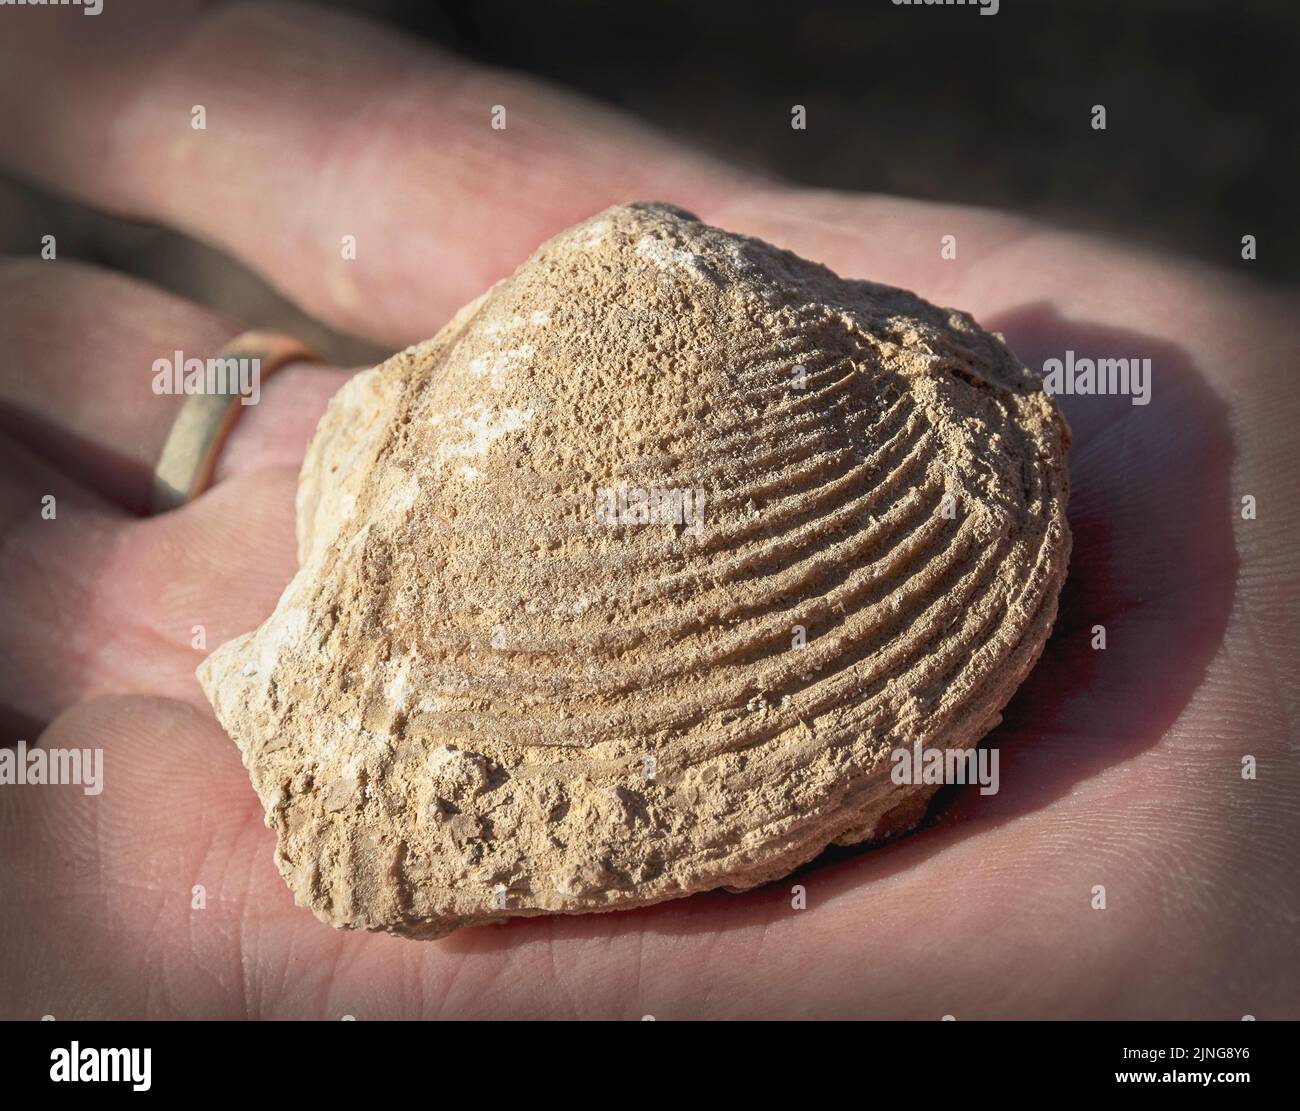 Senoian Period Clam Fossil on a Hand for size reference shows deep detailed ridges in the limestone Stock Photo